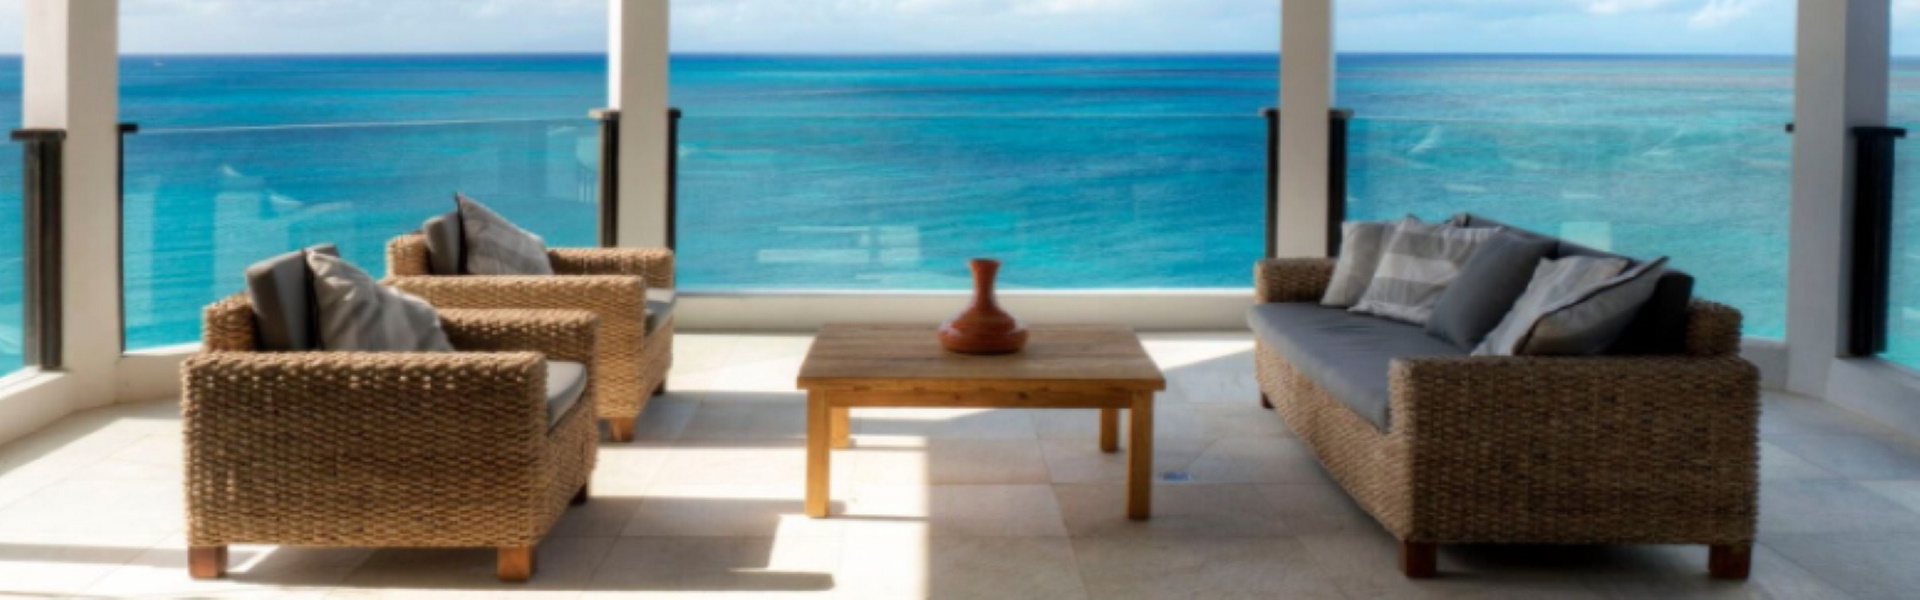 Antigua and Barbuda Property - A good time to buy in the Caribbean?